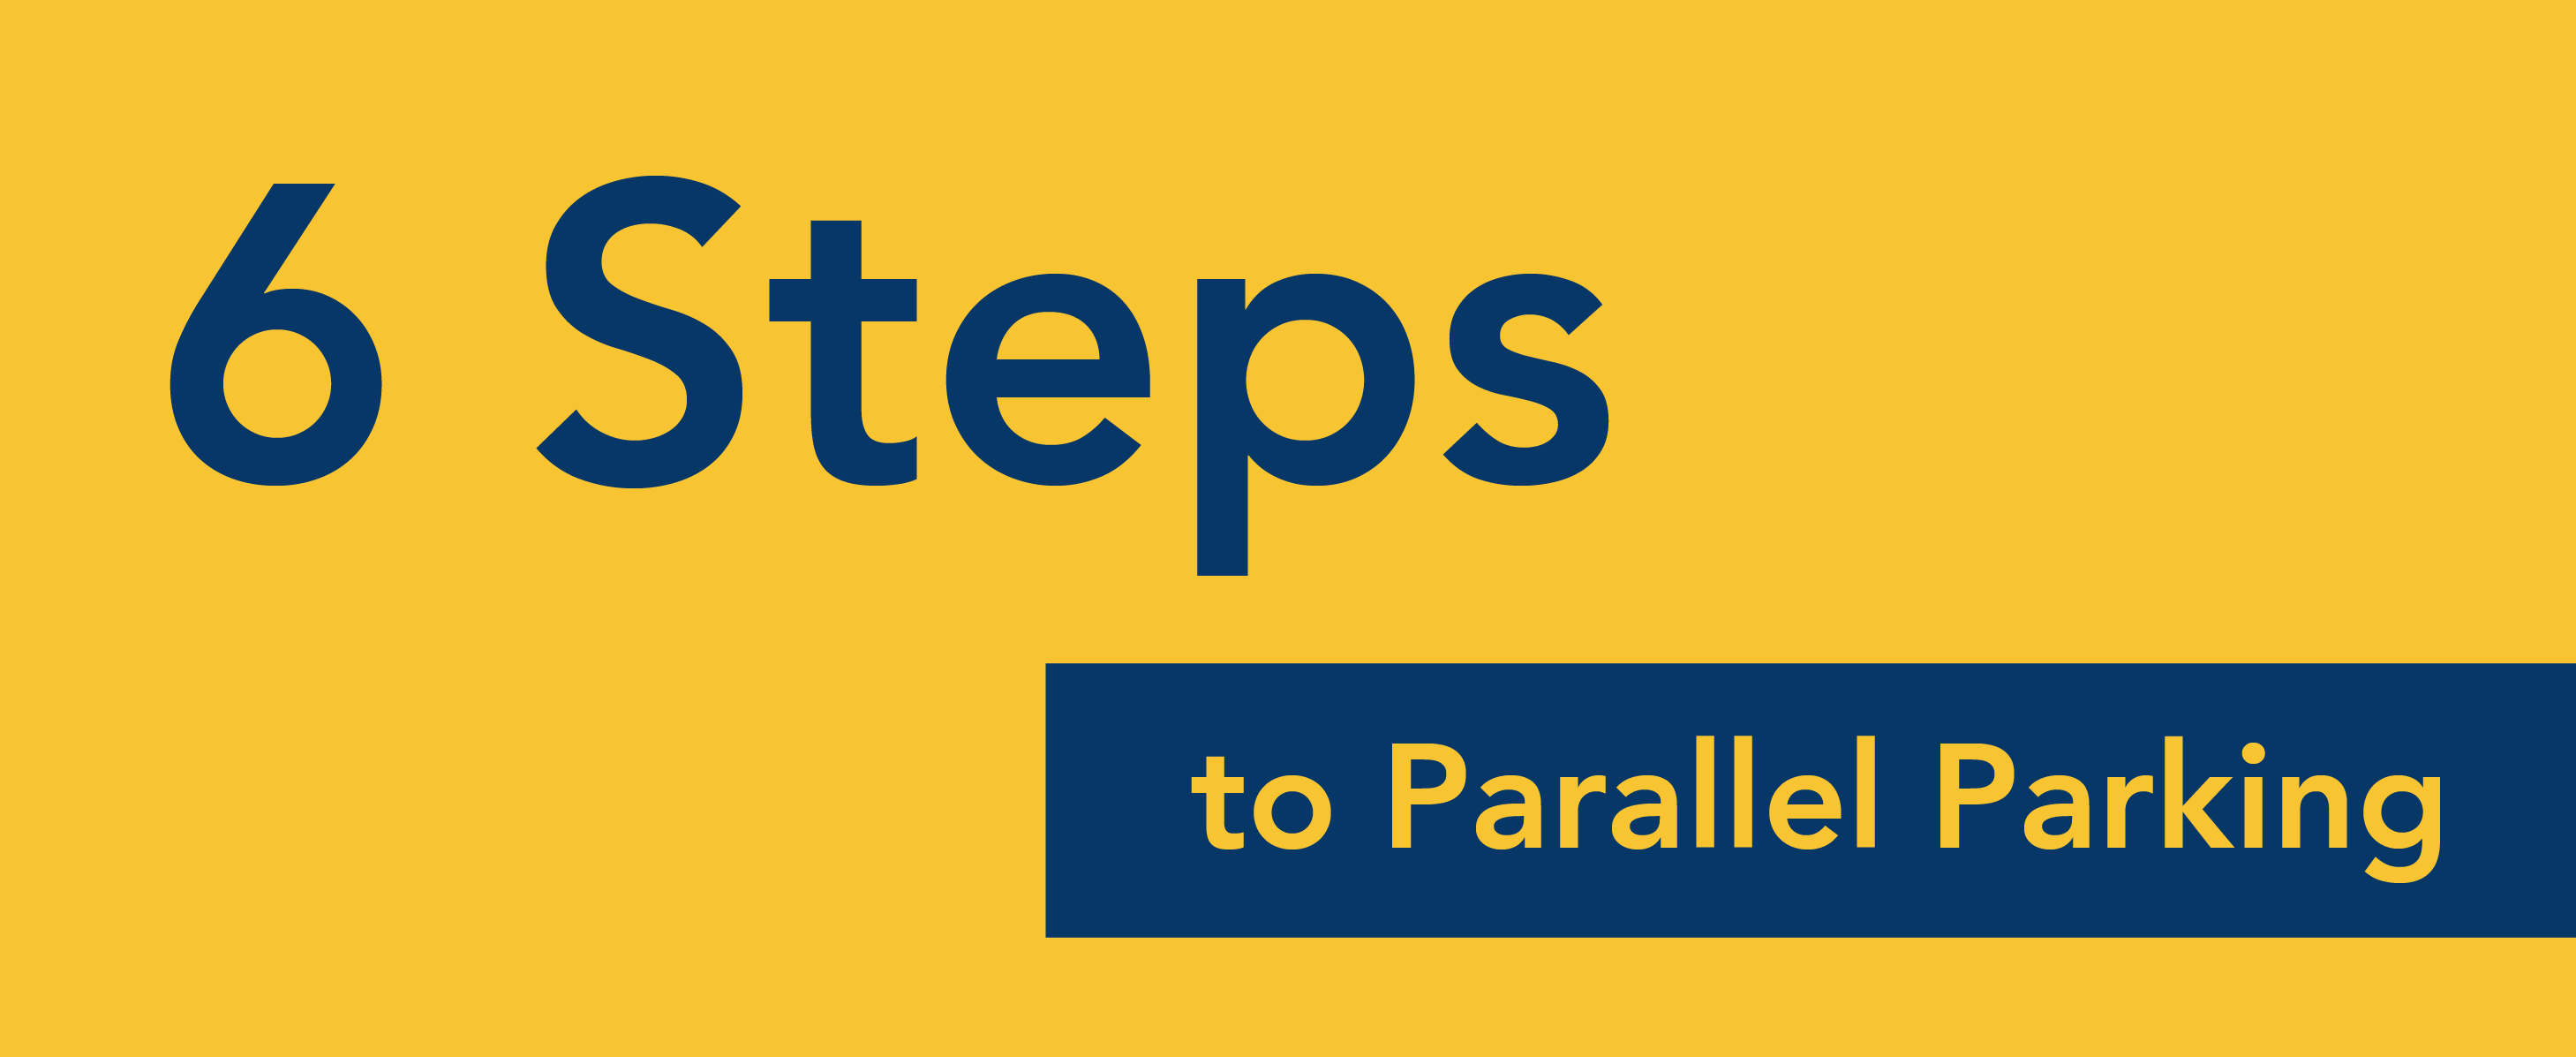 6 Steps to Parallel Parking